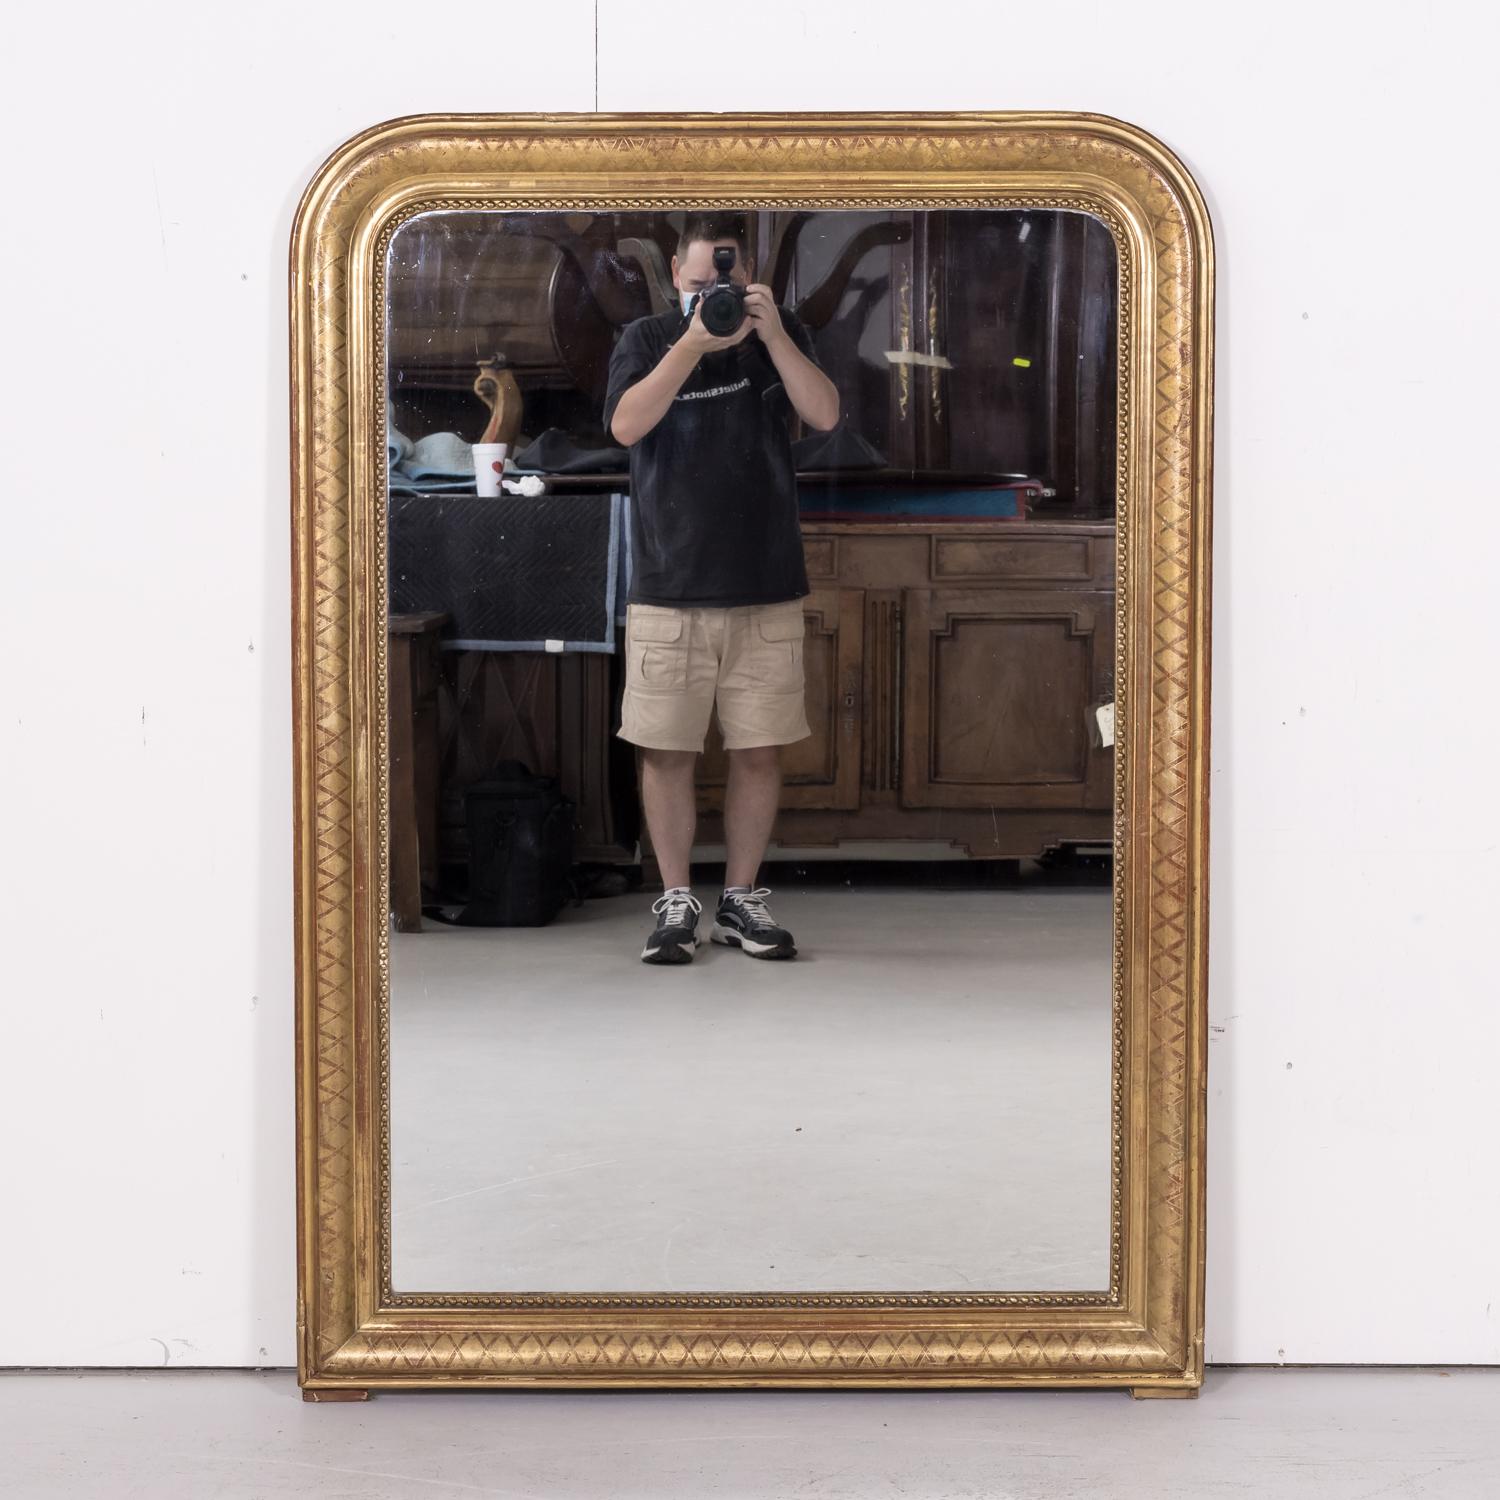 A large 19th century French Louis Philippe period giltwood mirror having its original mercury glass and cross hatch etching to the frame, circa 1840s. The tall rectangular shape of the frame has straight corners at the base, while the upper